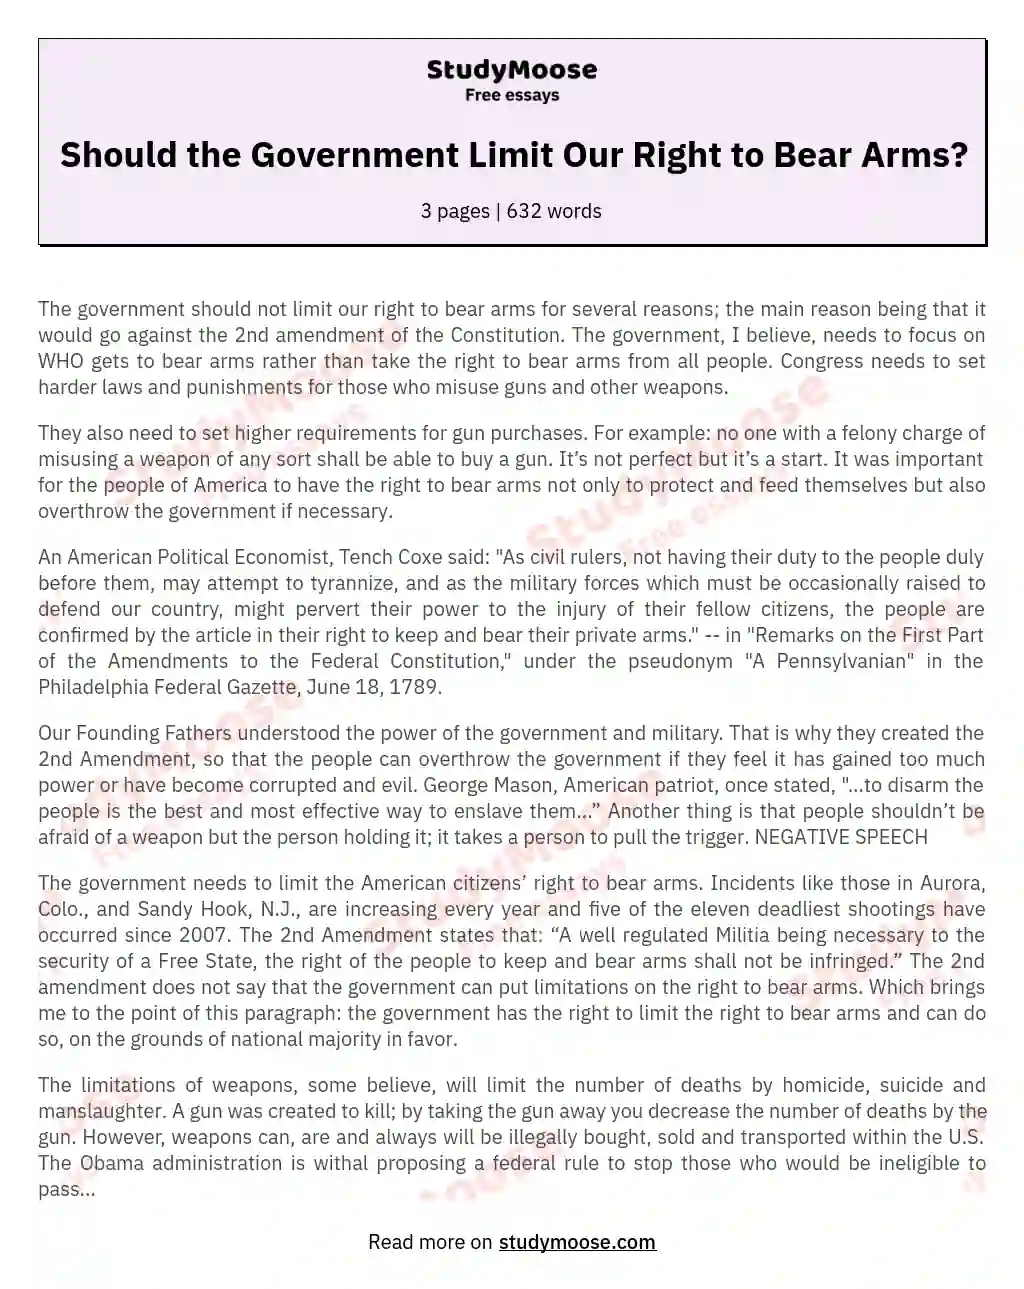 Should the Government Limit Our Right to Bear Arms? essay